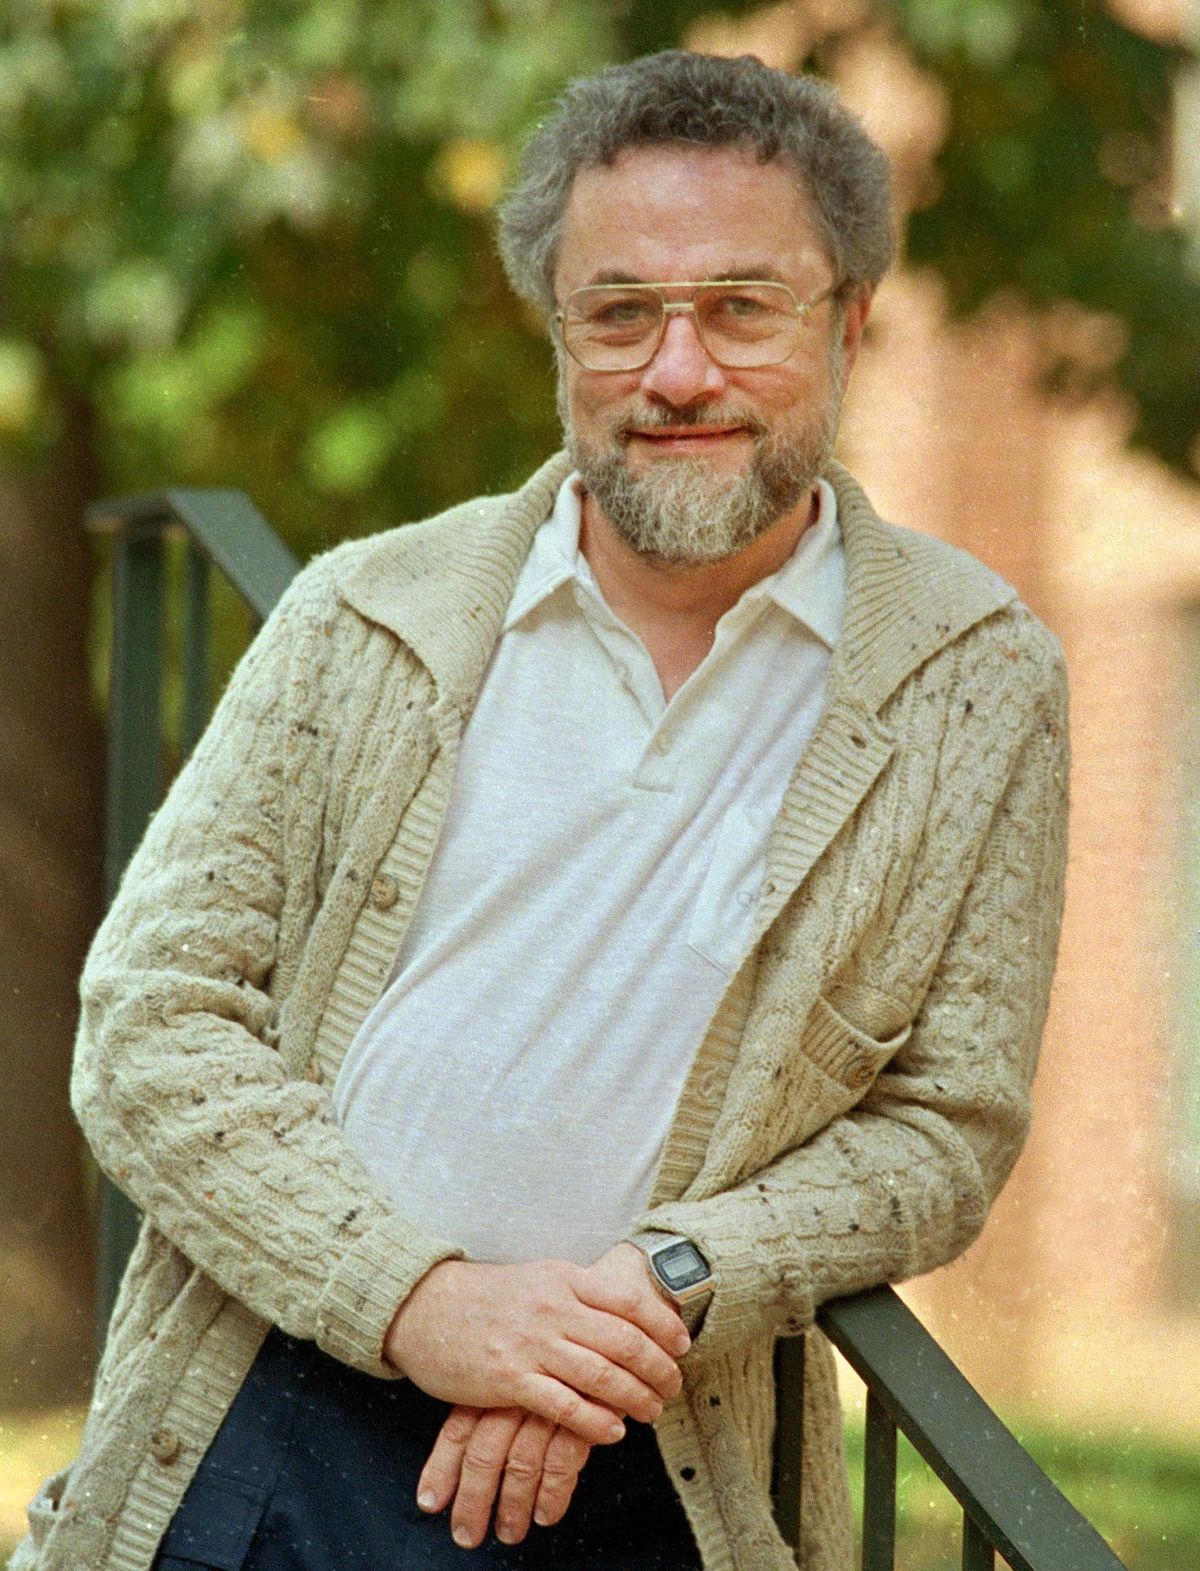 In this October 1987, file photo, Adrian Cronauer, a disc jockey on the Saigon-based Dawn Buster radio show from 1965-1966 whose experiences in the Vietnam War were chronicled in the movie “Good Morning, Vietnam,” poses outside his home in Philadelphia, Pa. Cronauer died Wednesday, July 18, 2018. He was 79. Cronauer opened his Armed Forces Radio show with “Goooooood morning, Vietnam!” (Charles Krupa / AP)